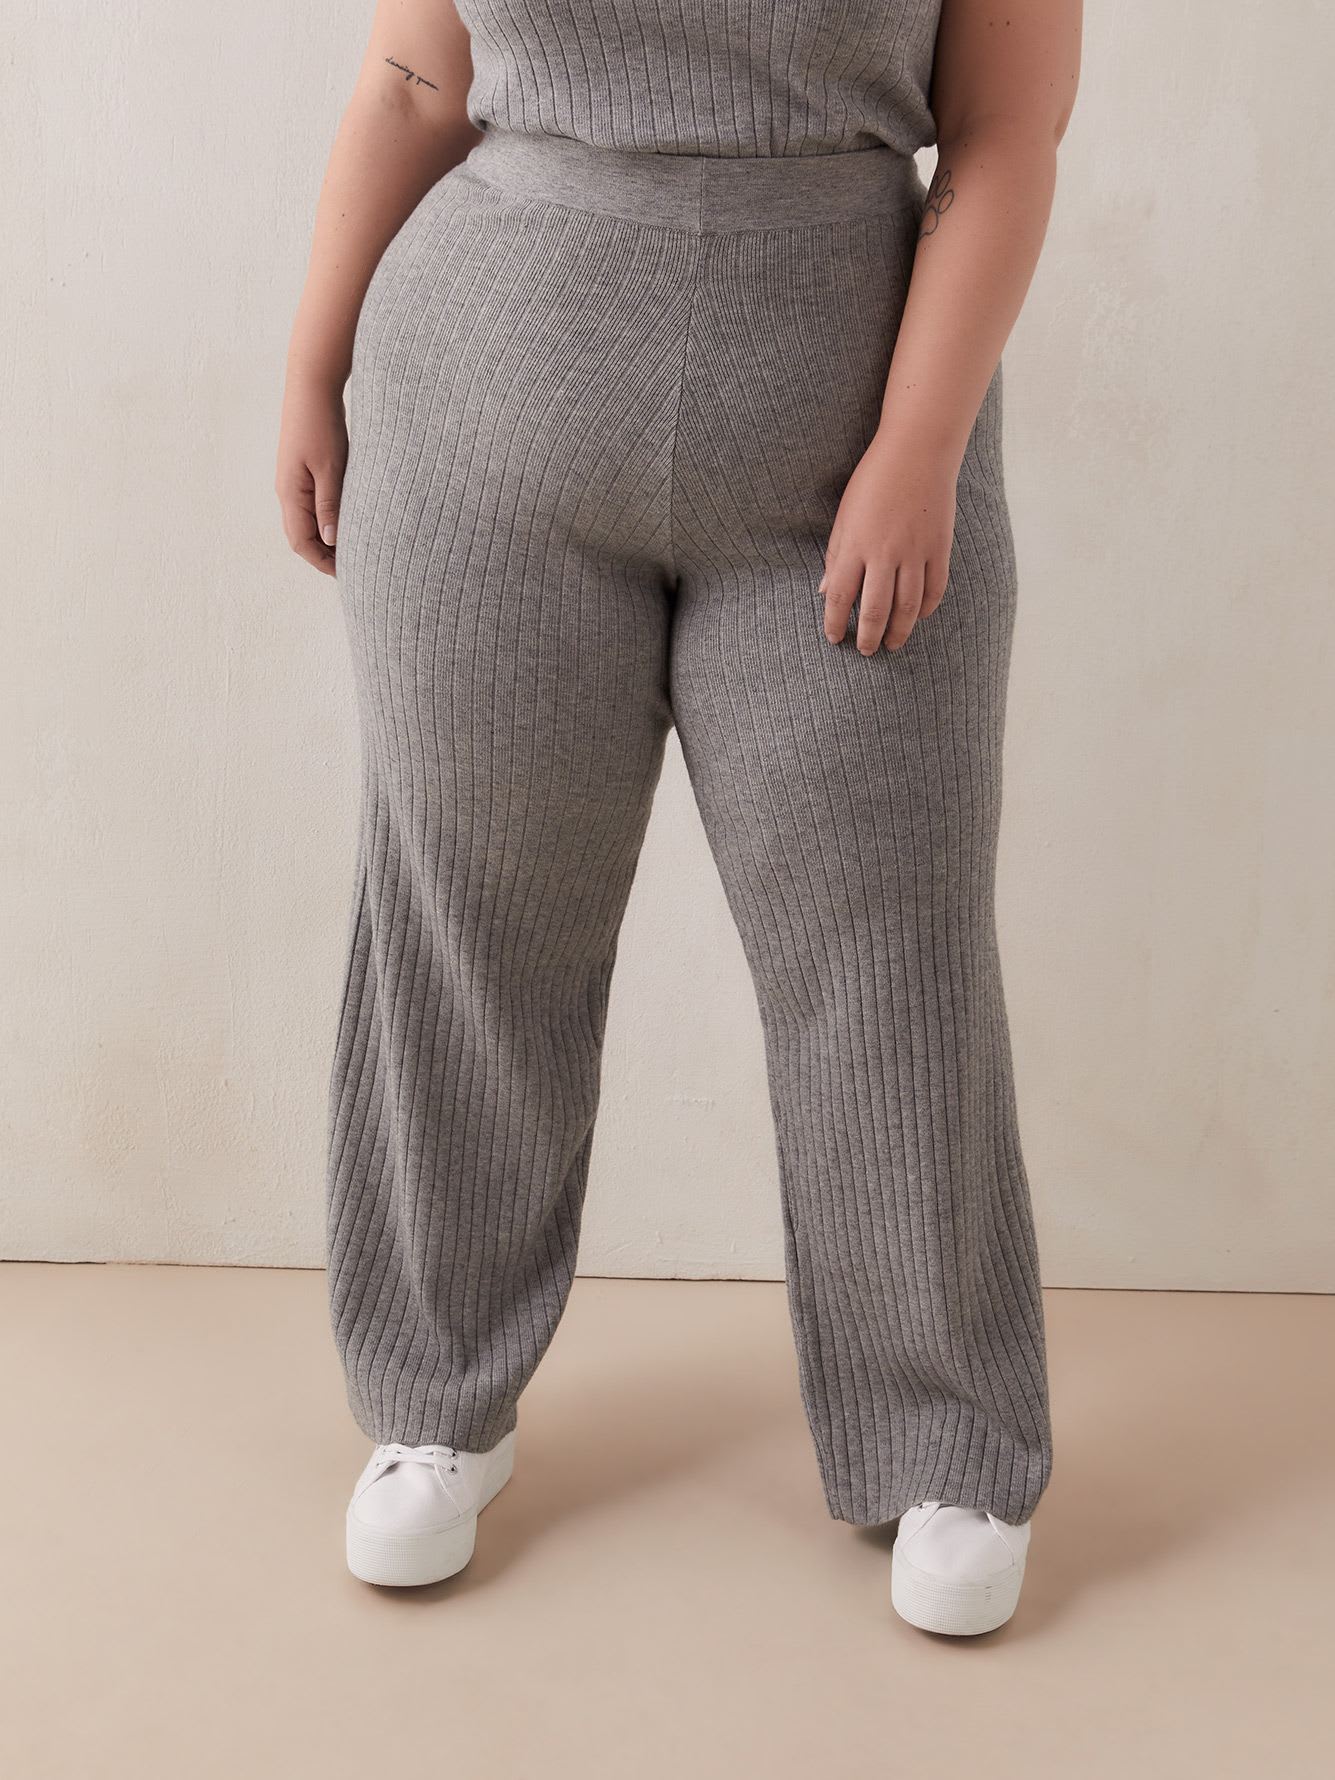 Wide-Leg Pull-On Knit Pants - In Every Story